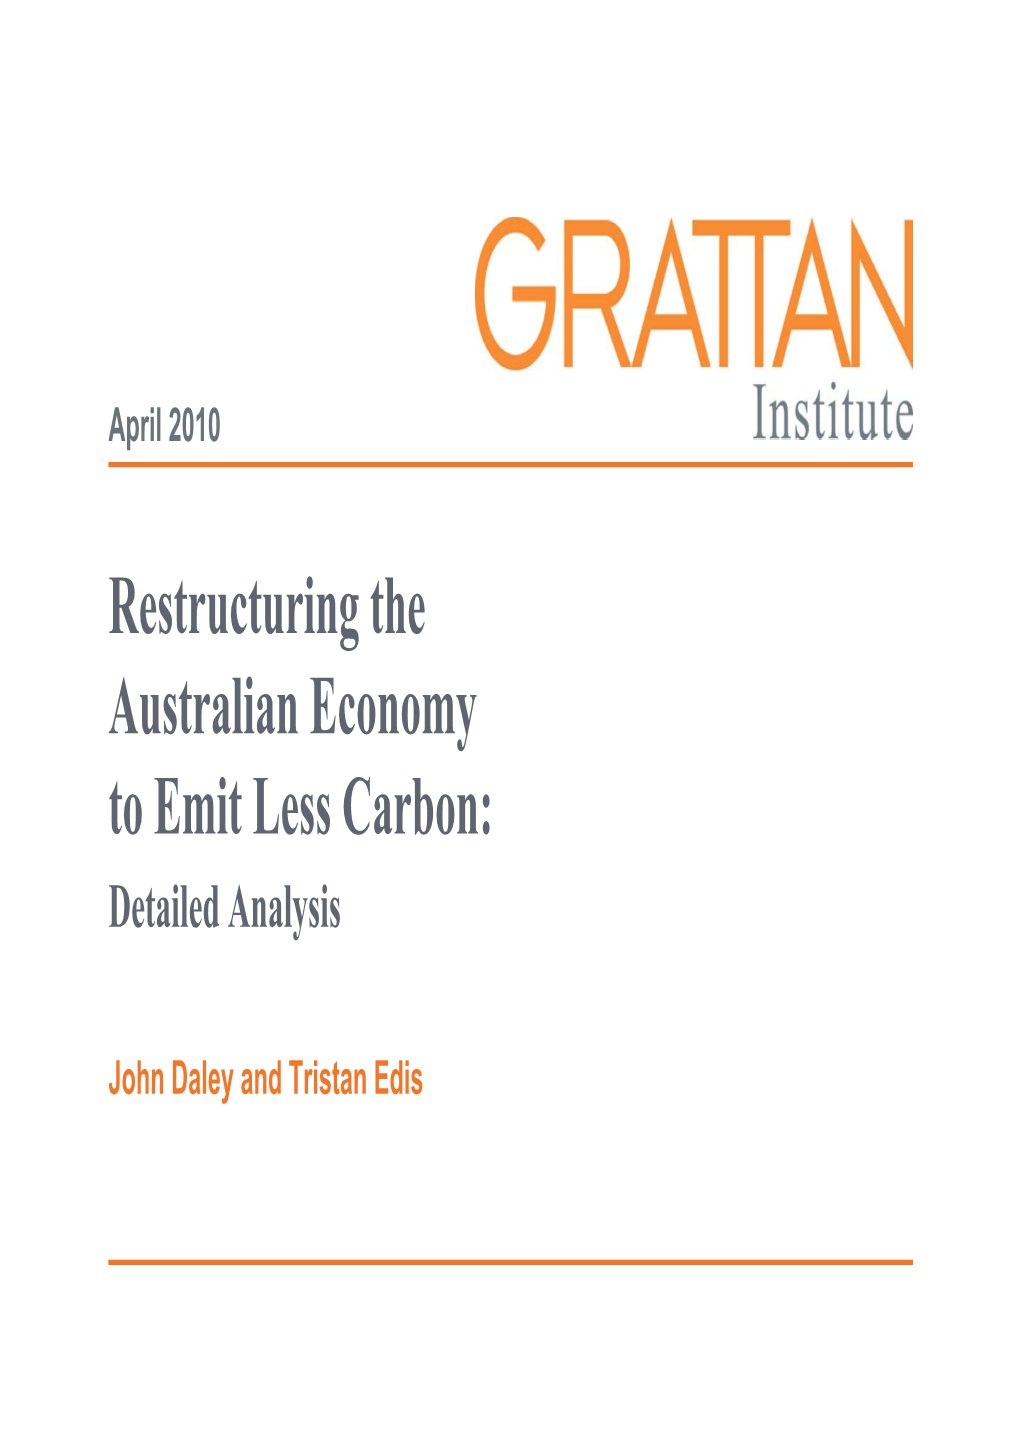 Restructuring the Australian Economy to Emit Less Carbon: Detailed Analysis